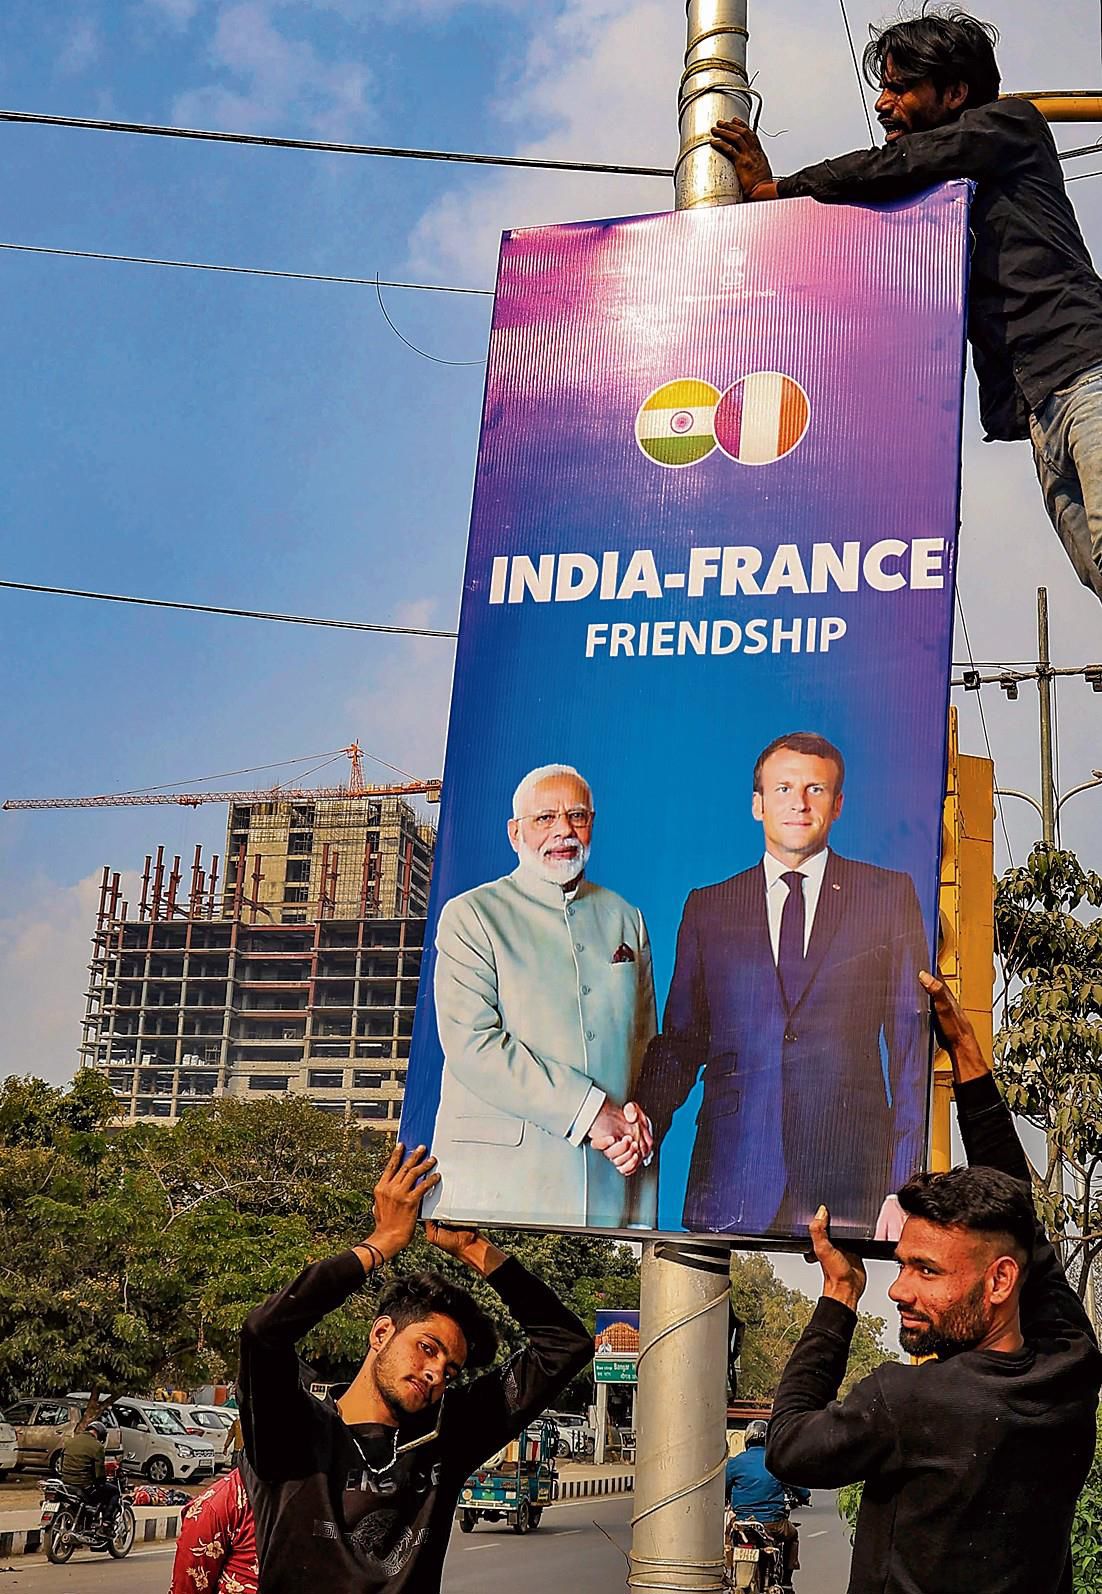 French President Emmanuel Macron arrives in Jaipur today, to tour city with PM Modi